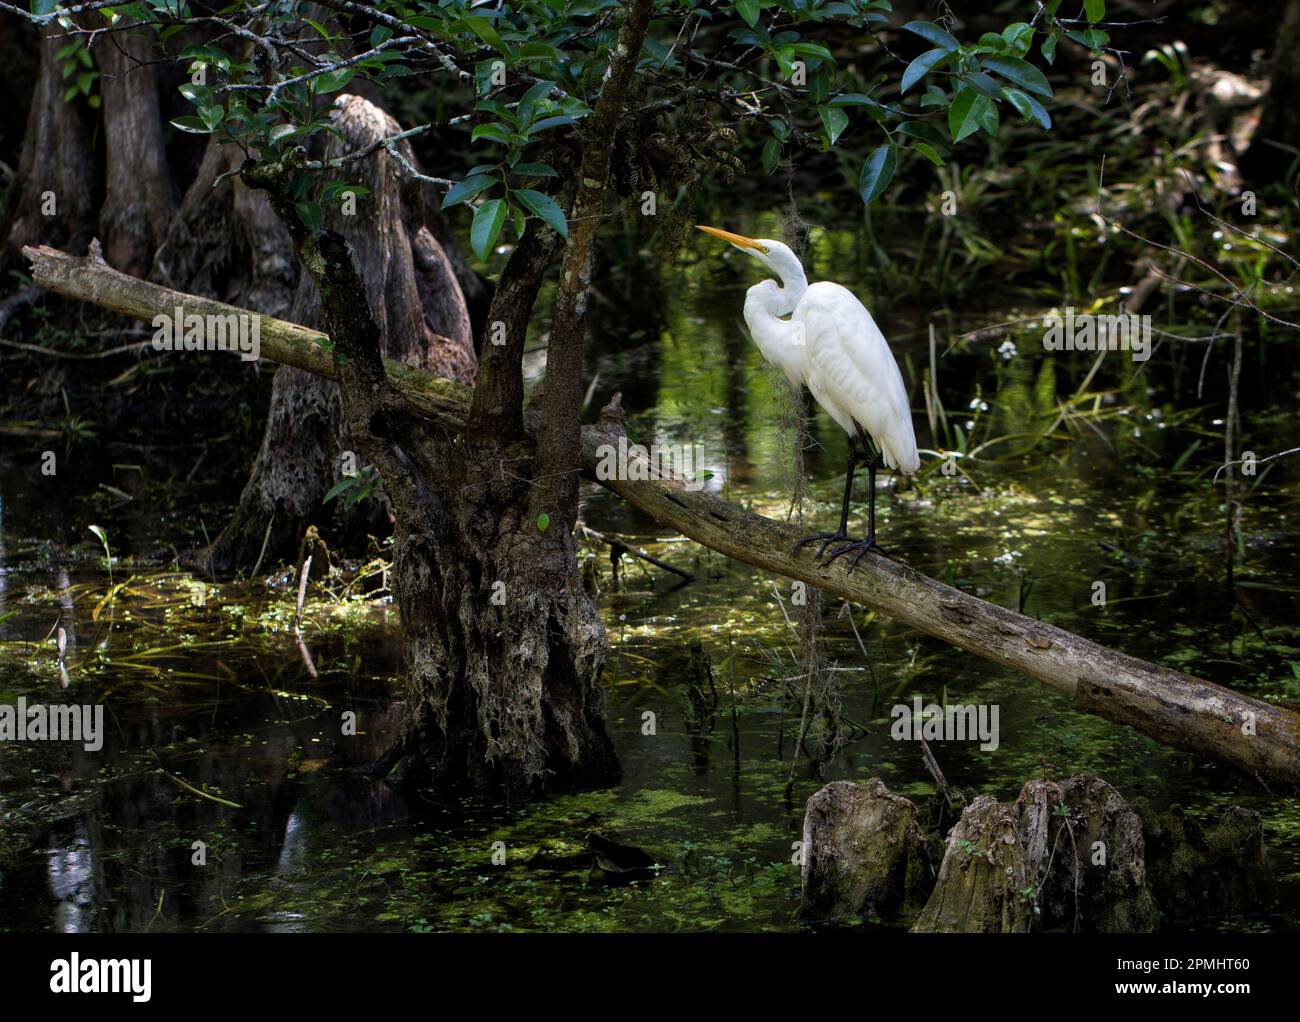 White Egret appears luminous and inquisitive against the shadowy background of Big Cypress Swamp. Stock Photo